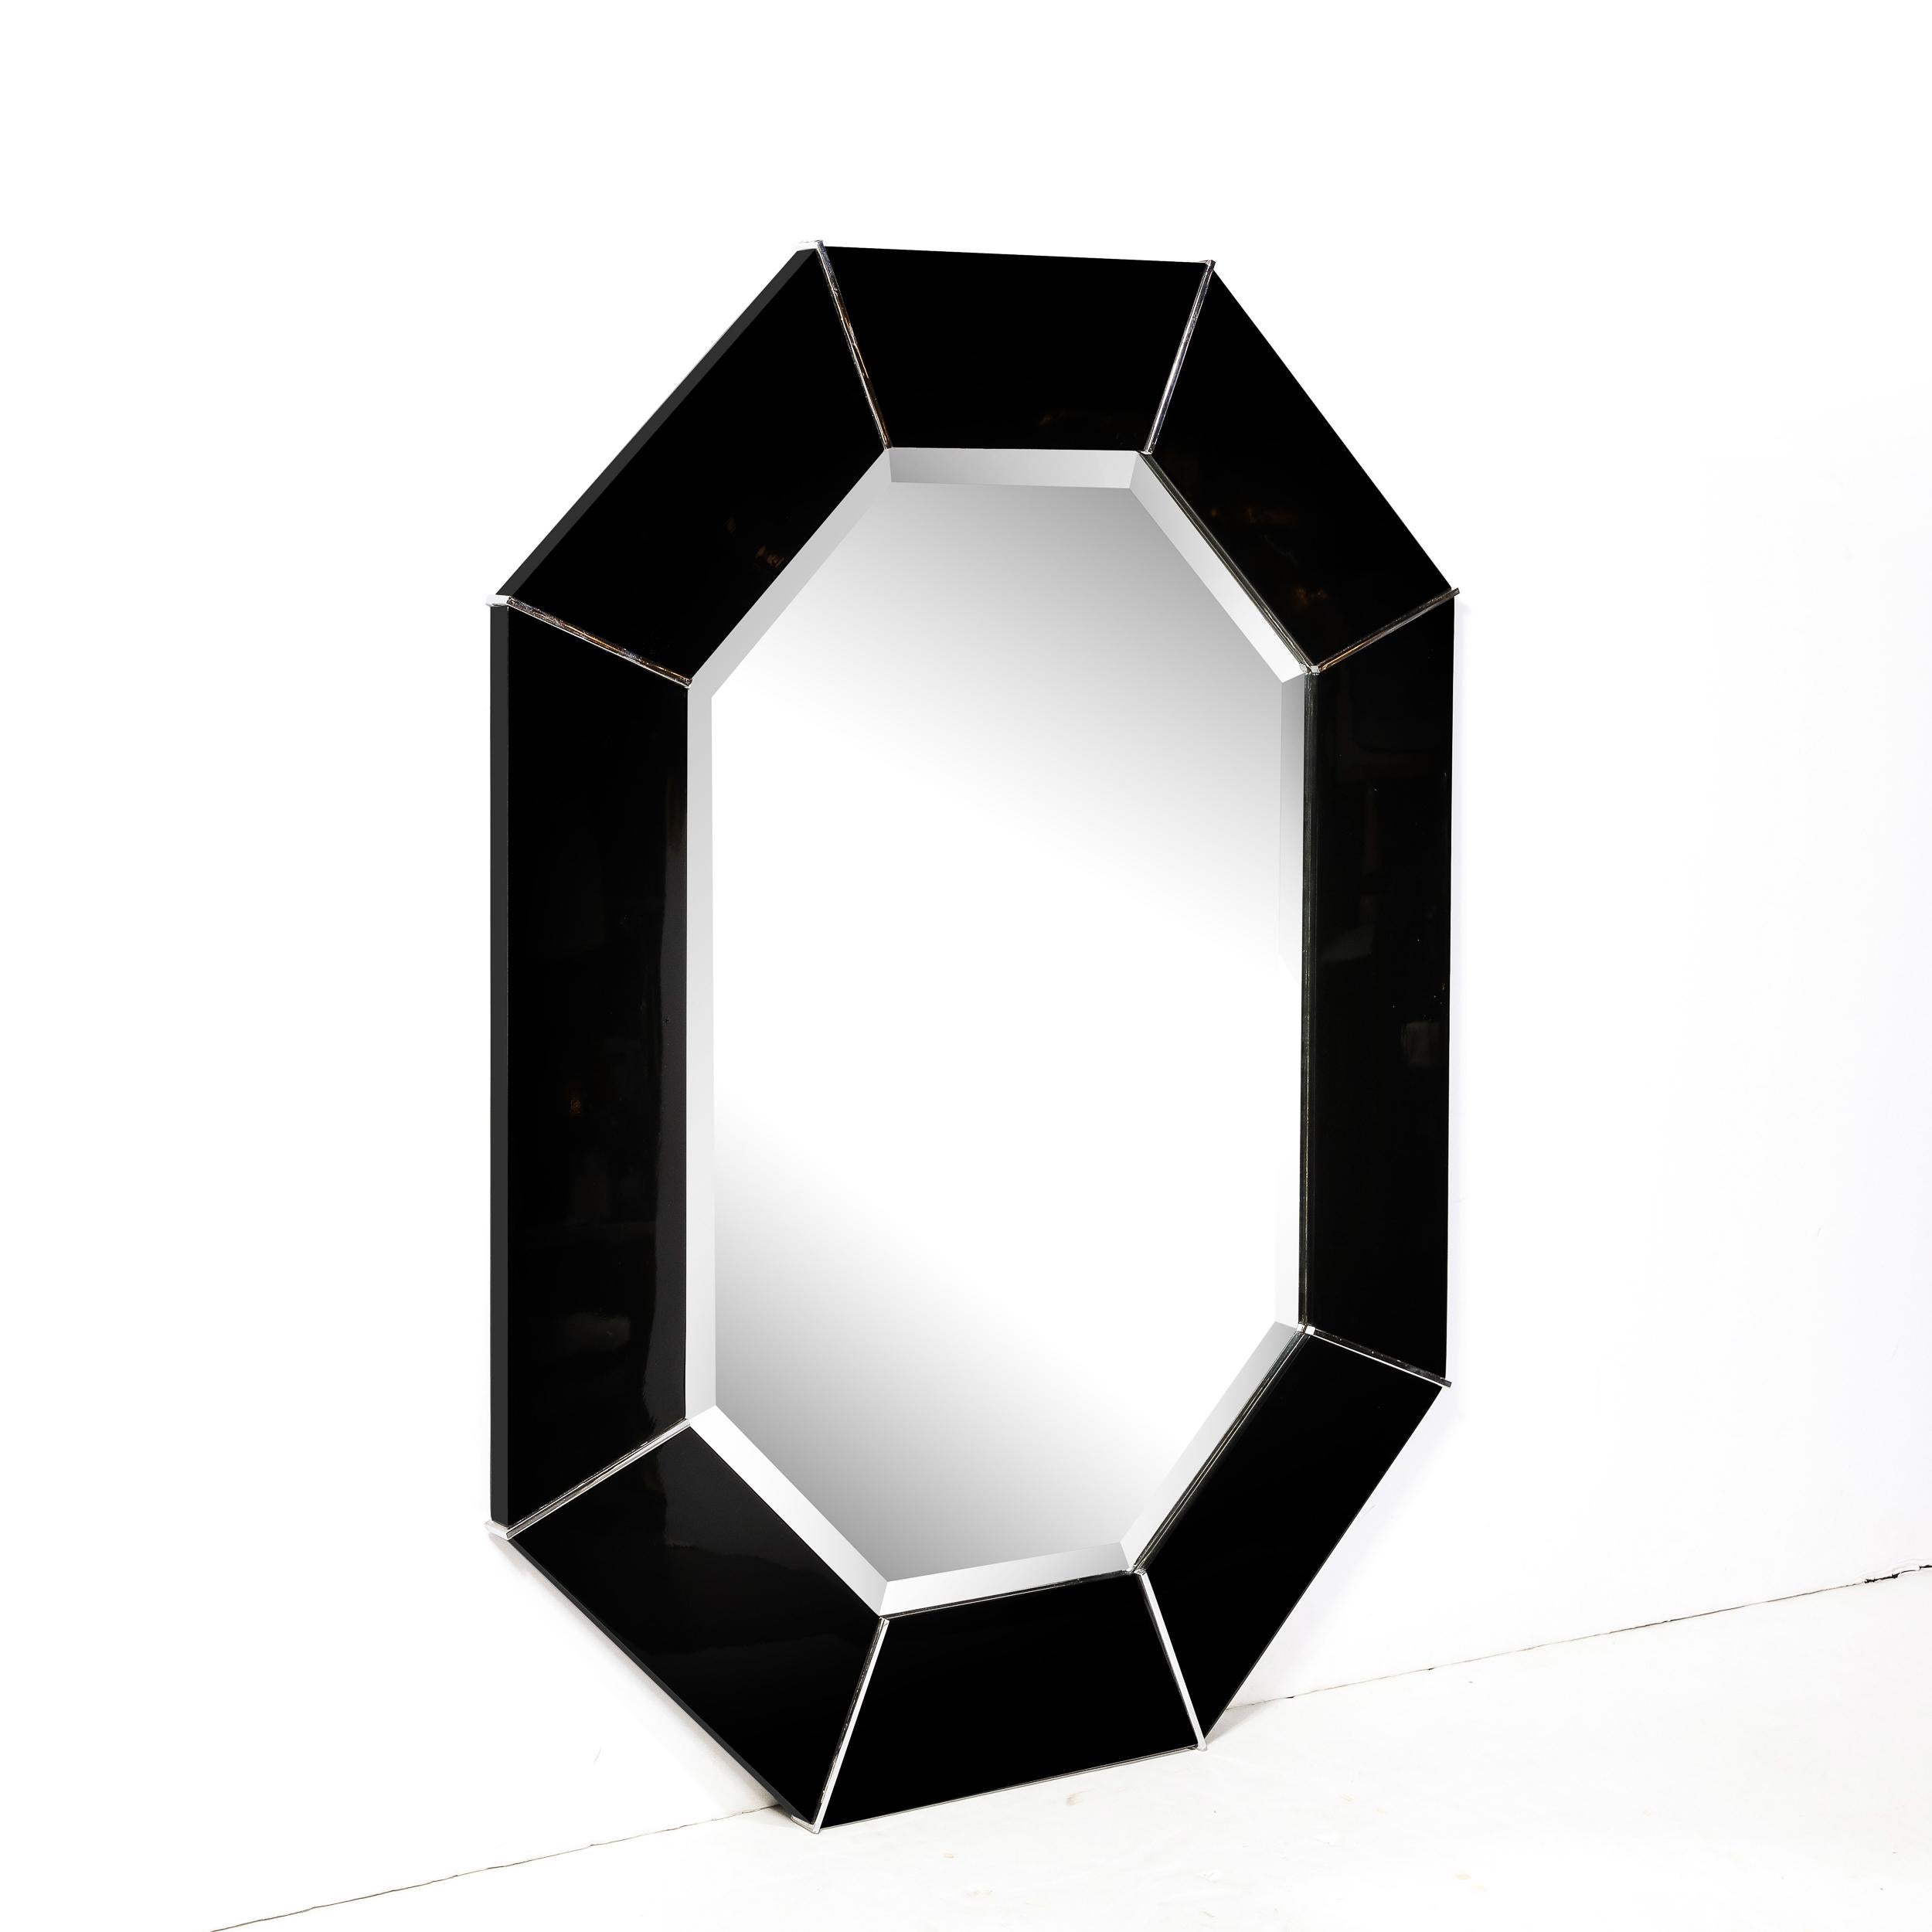 This gorgeous and important Mid-Century Modern black lacquered mirror was realized by Karl Springer- one of the most esteemed designers of the 20th century. Springer was known for reviving Classic Art Deco designs with bold proportions and exotic